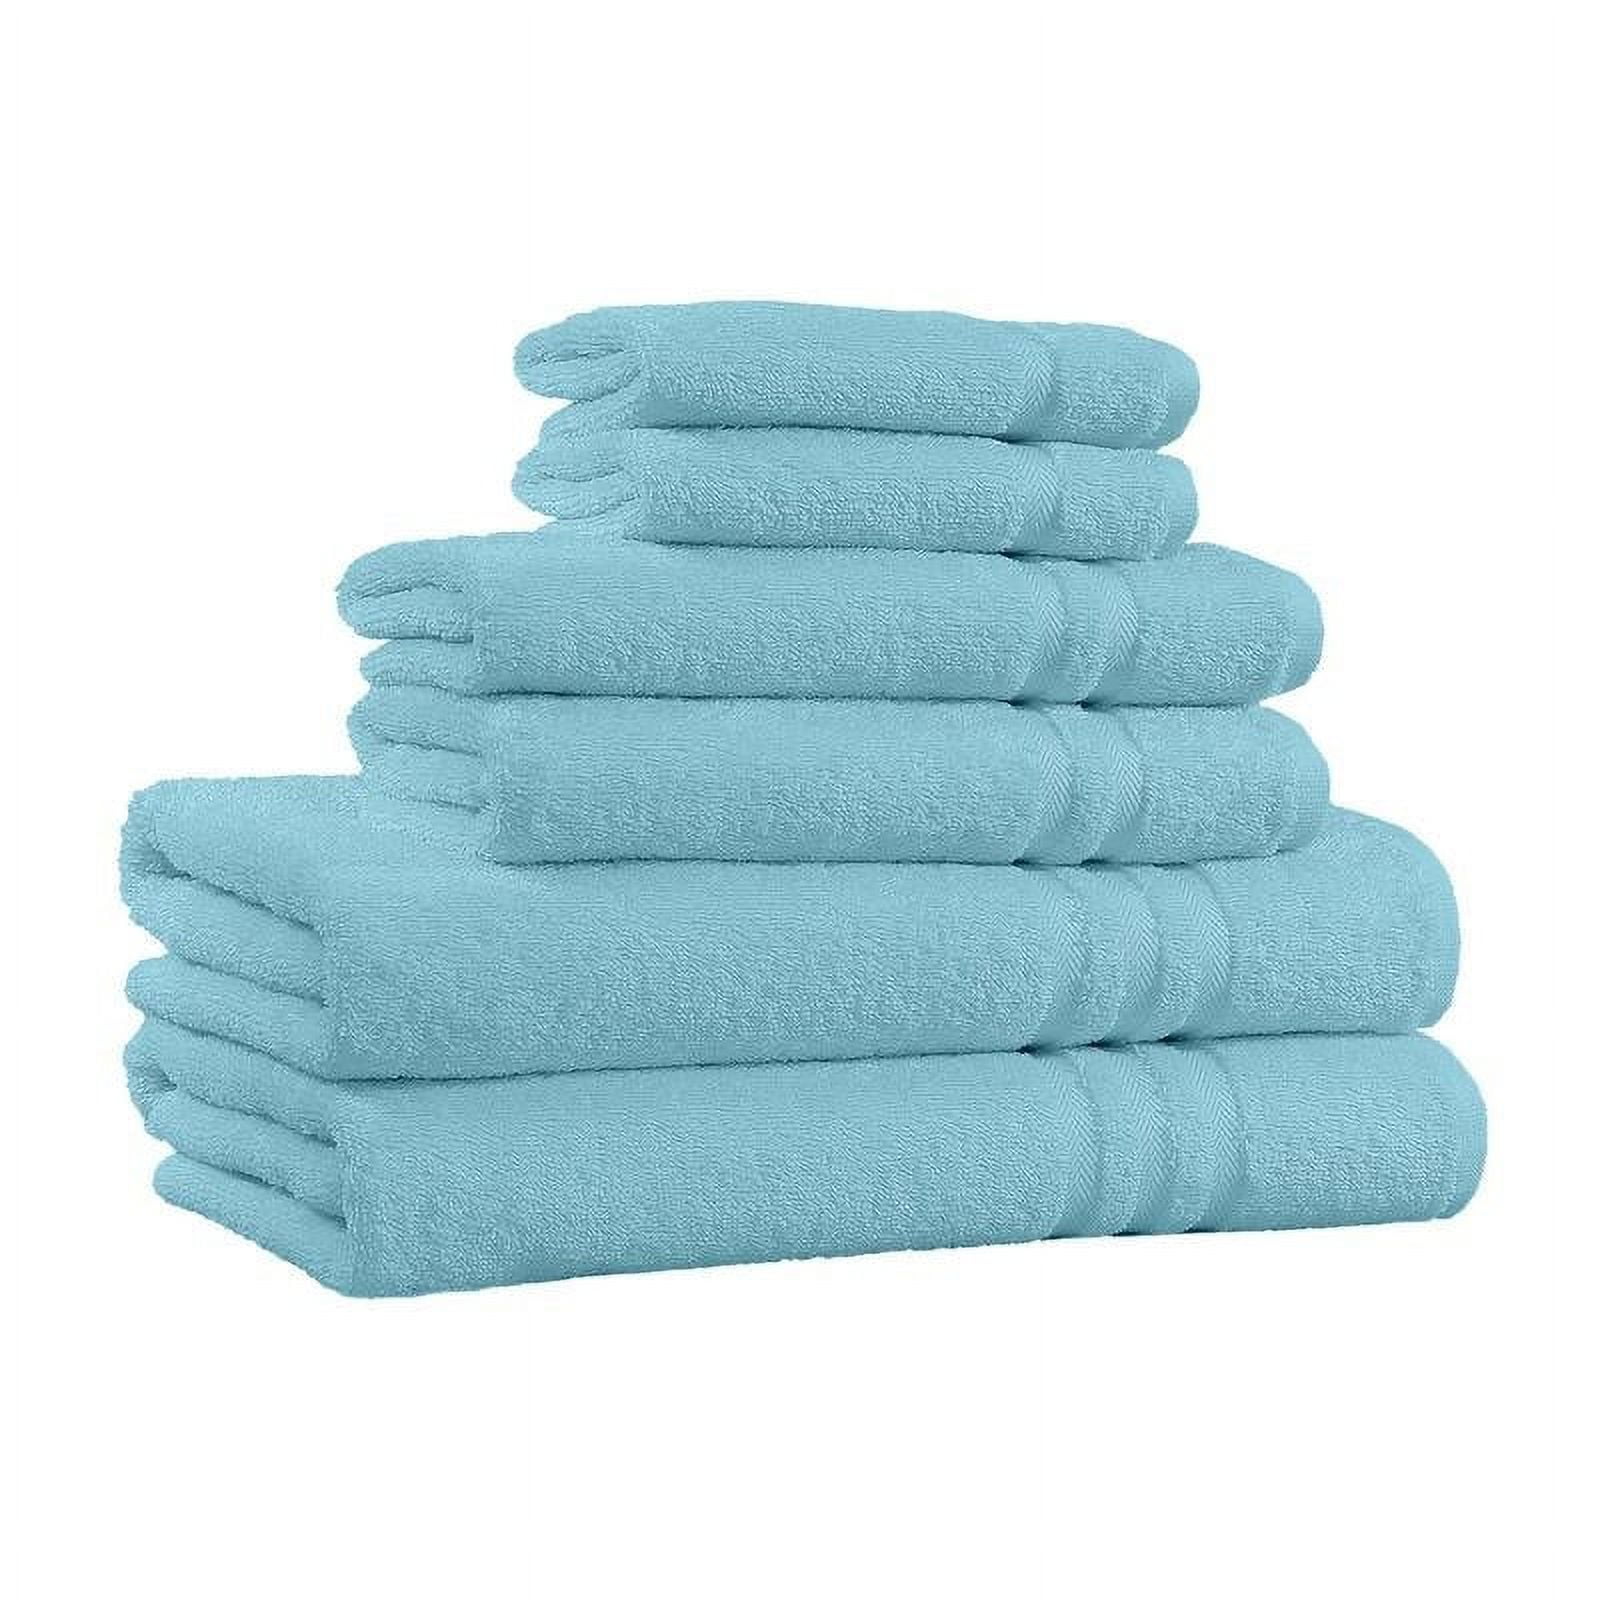 Towel and Linen Mart 100% Cotton 6 Pack Bath Towel Set, Quick Dry, Super  Absorbent, Light Weight, Soft, Multi Colors (27 x 54 Pack of 6) - Yahoo  Shopping